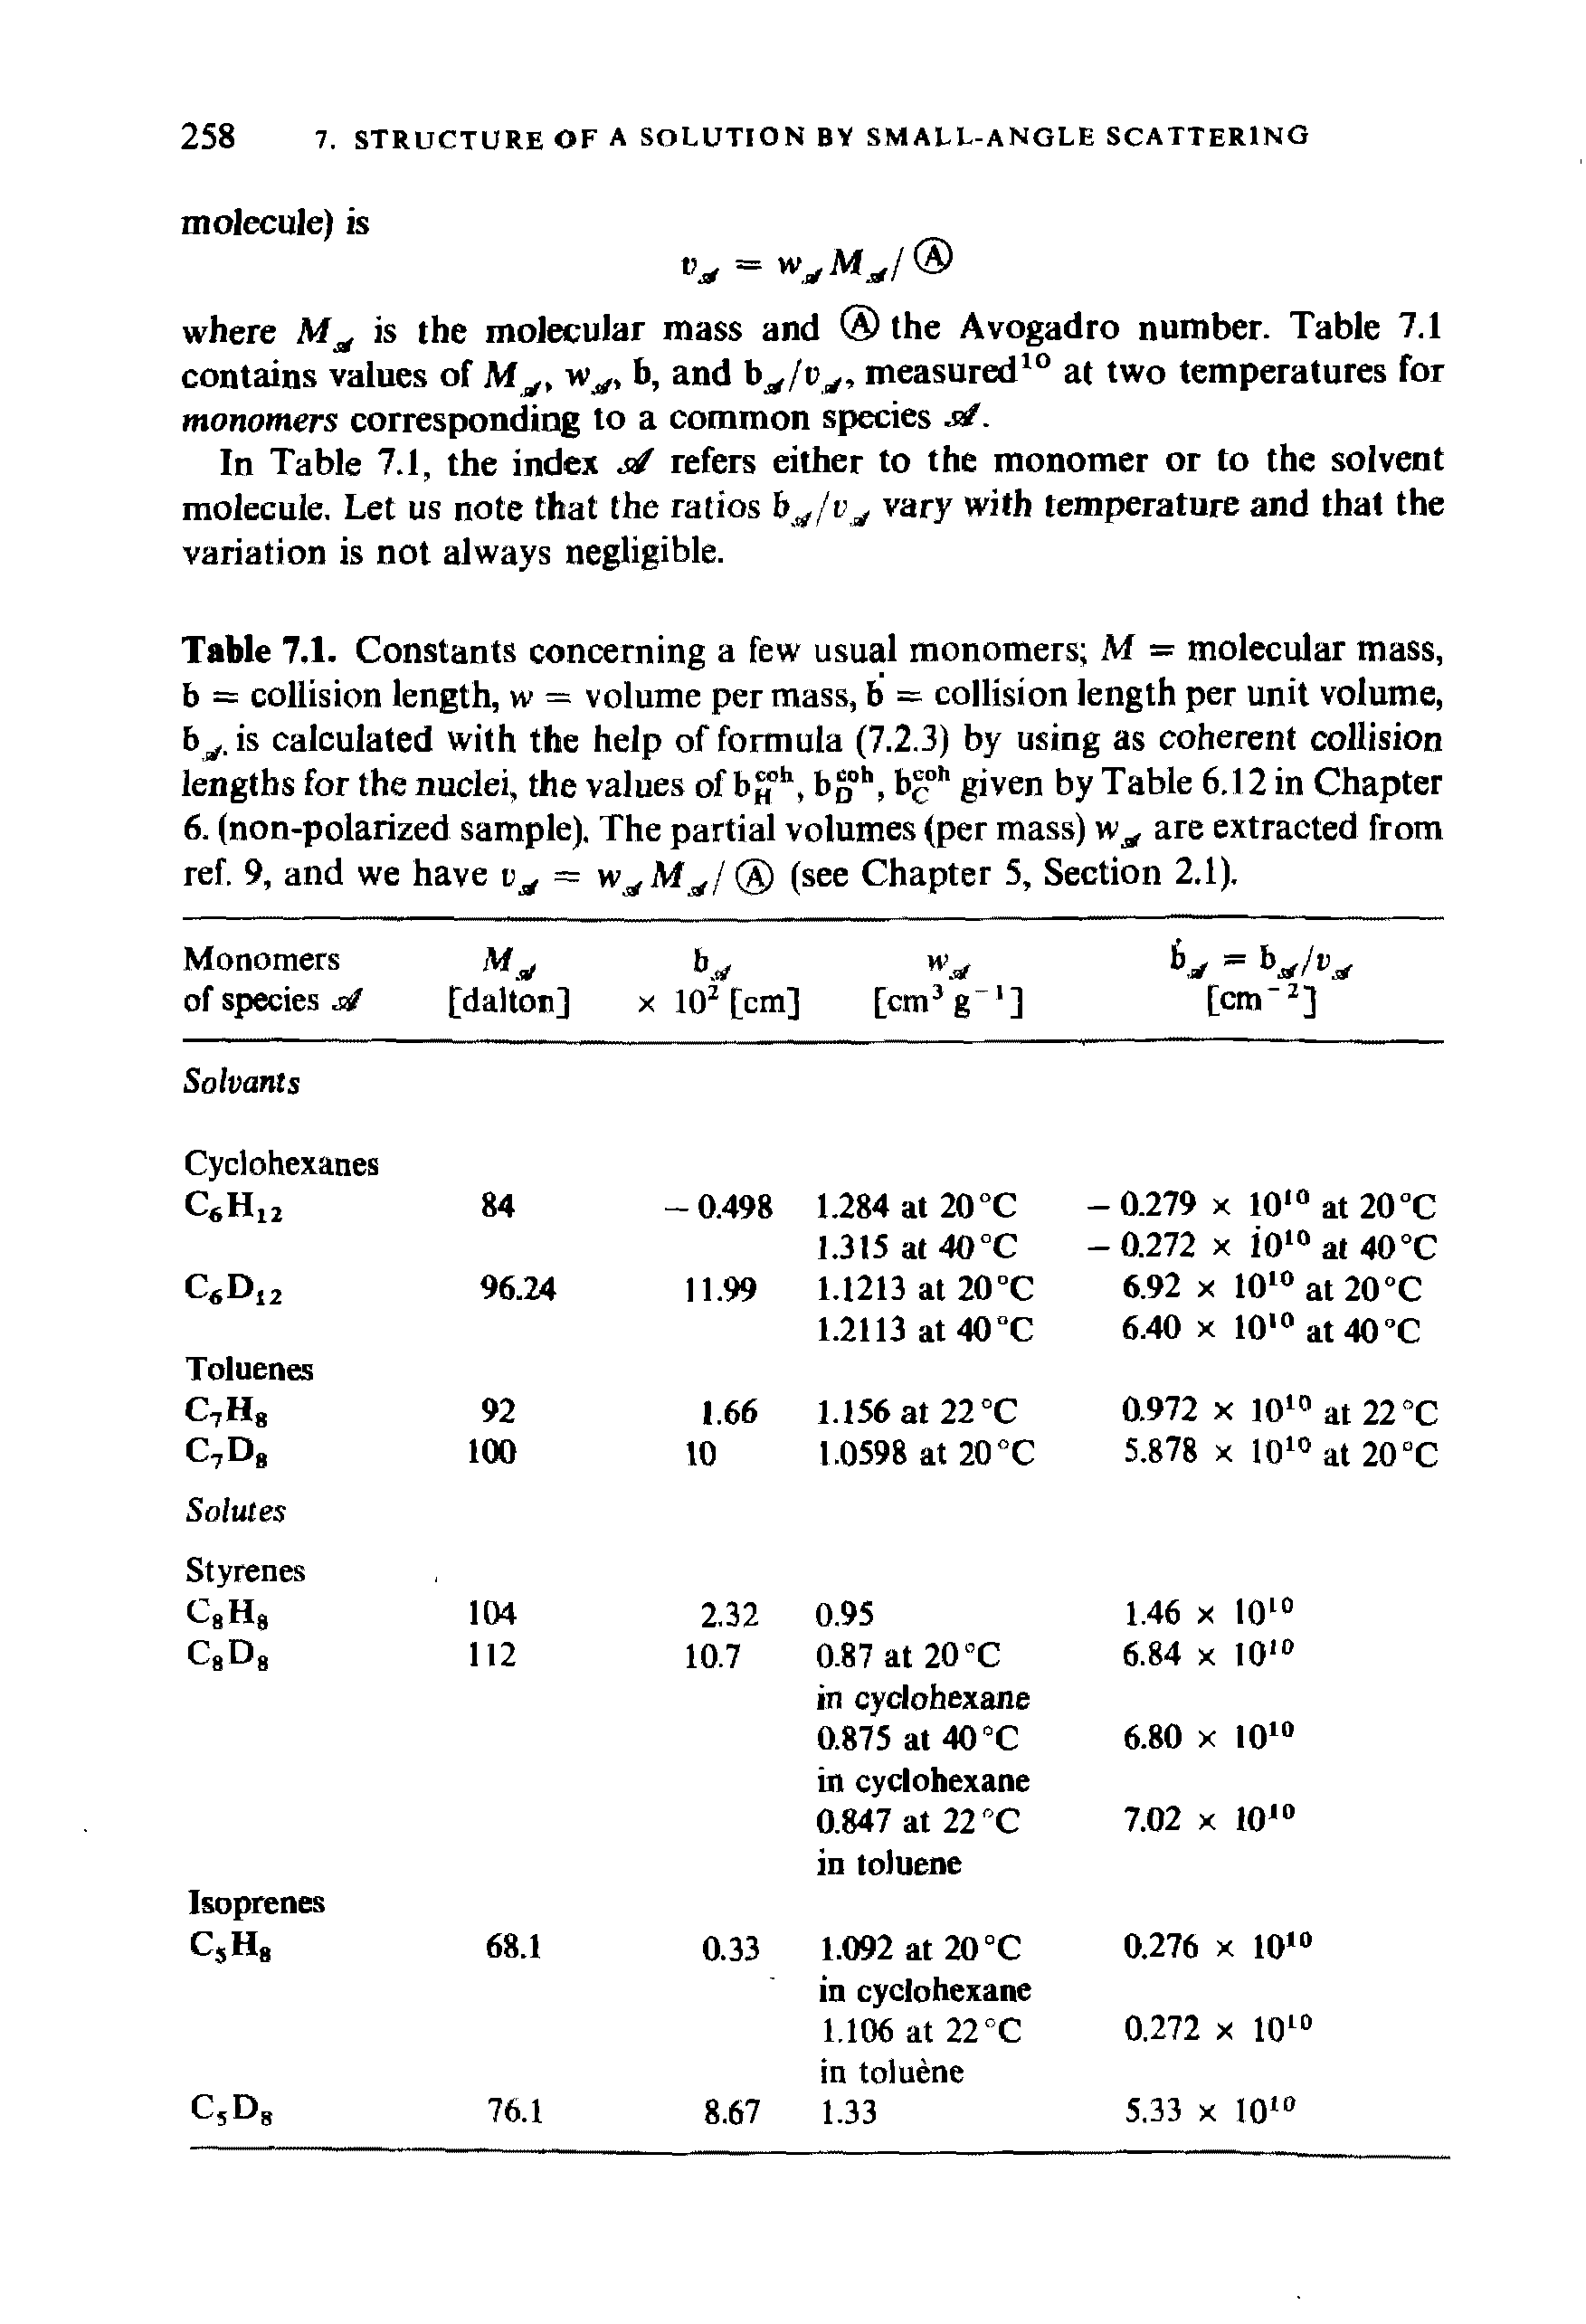 Table 7.1. Constants concerning a few usual monomers M = molecular mass, b = collision length, w = volume per mass, b = collision length per unit volume, b j. is calculated with the help of formula (7.2.3) by using as coherent collision lengths for the nuclei, the values of b 11, bQ0h, b 11 given by Table 6.12 in Chapter 6. (non-polarized sample). The partial volumes (per mass) wrf are extracted from ref. 9, and we have v M j(A) (see Chapter 5, Section 2.1).